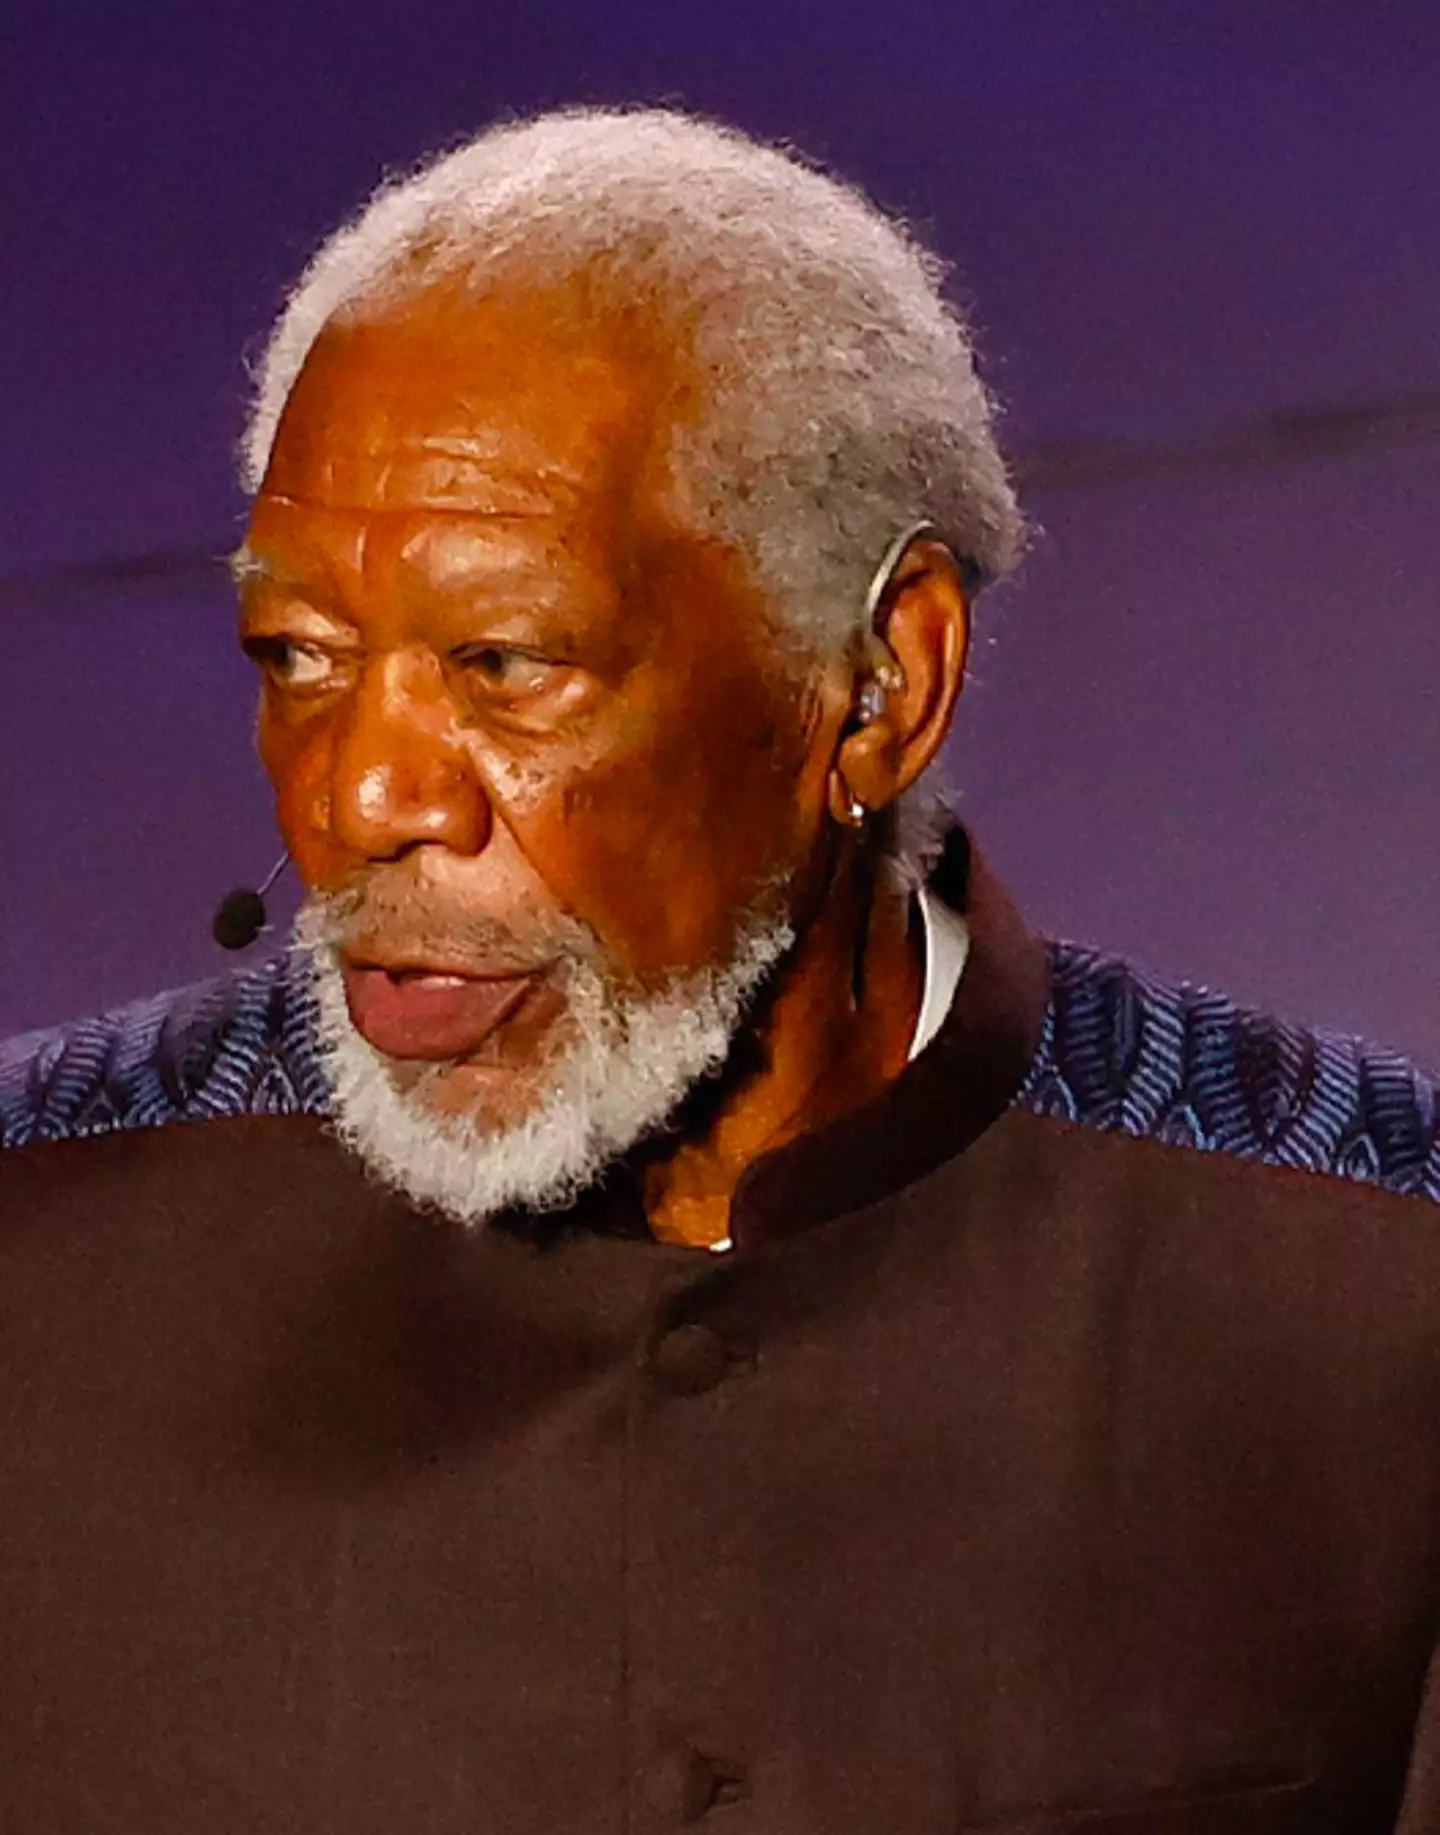 Morgan Freeman expressed his distaste with terms like 'African American'.